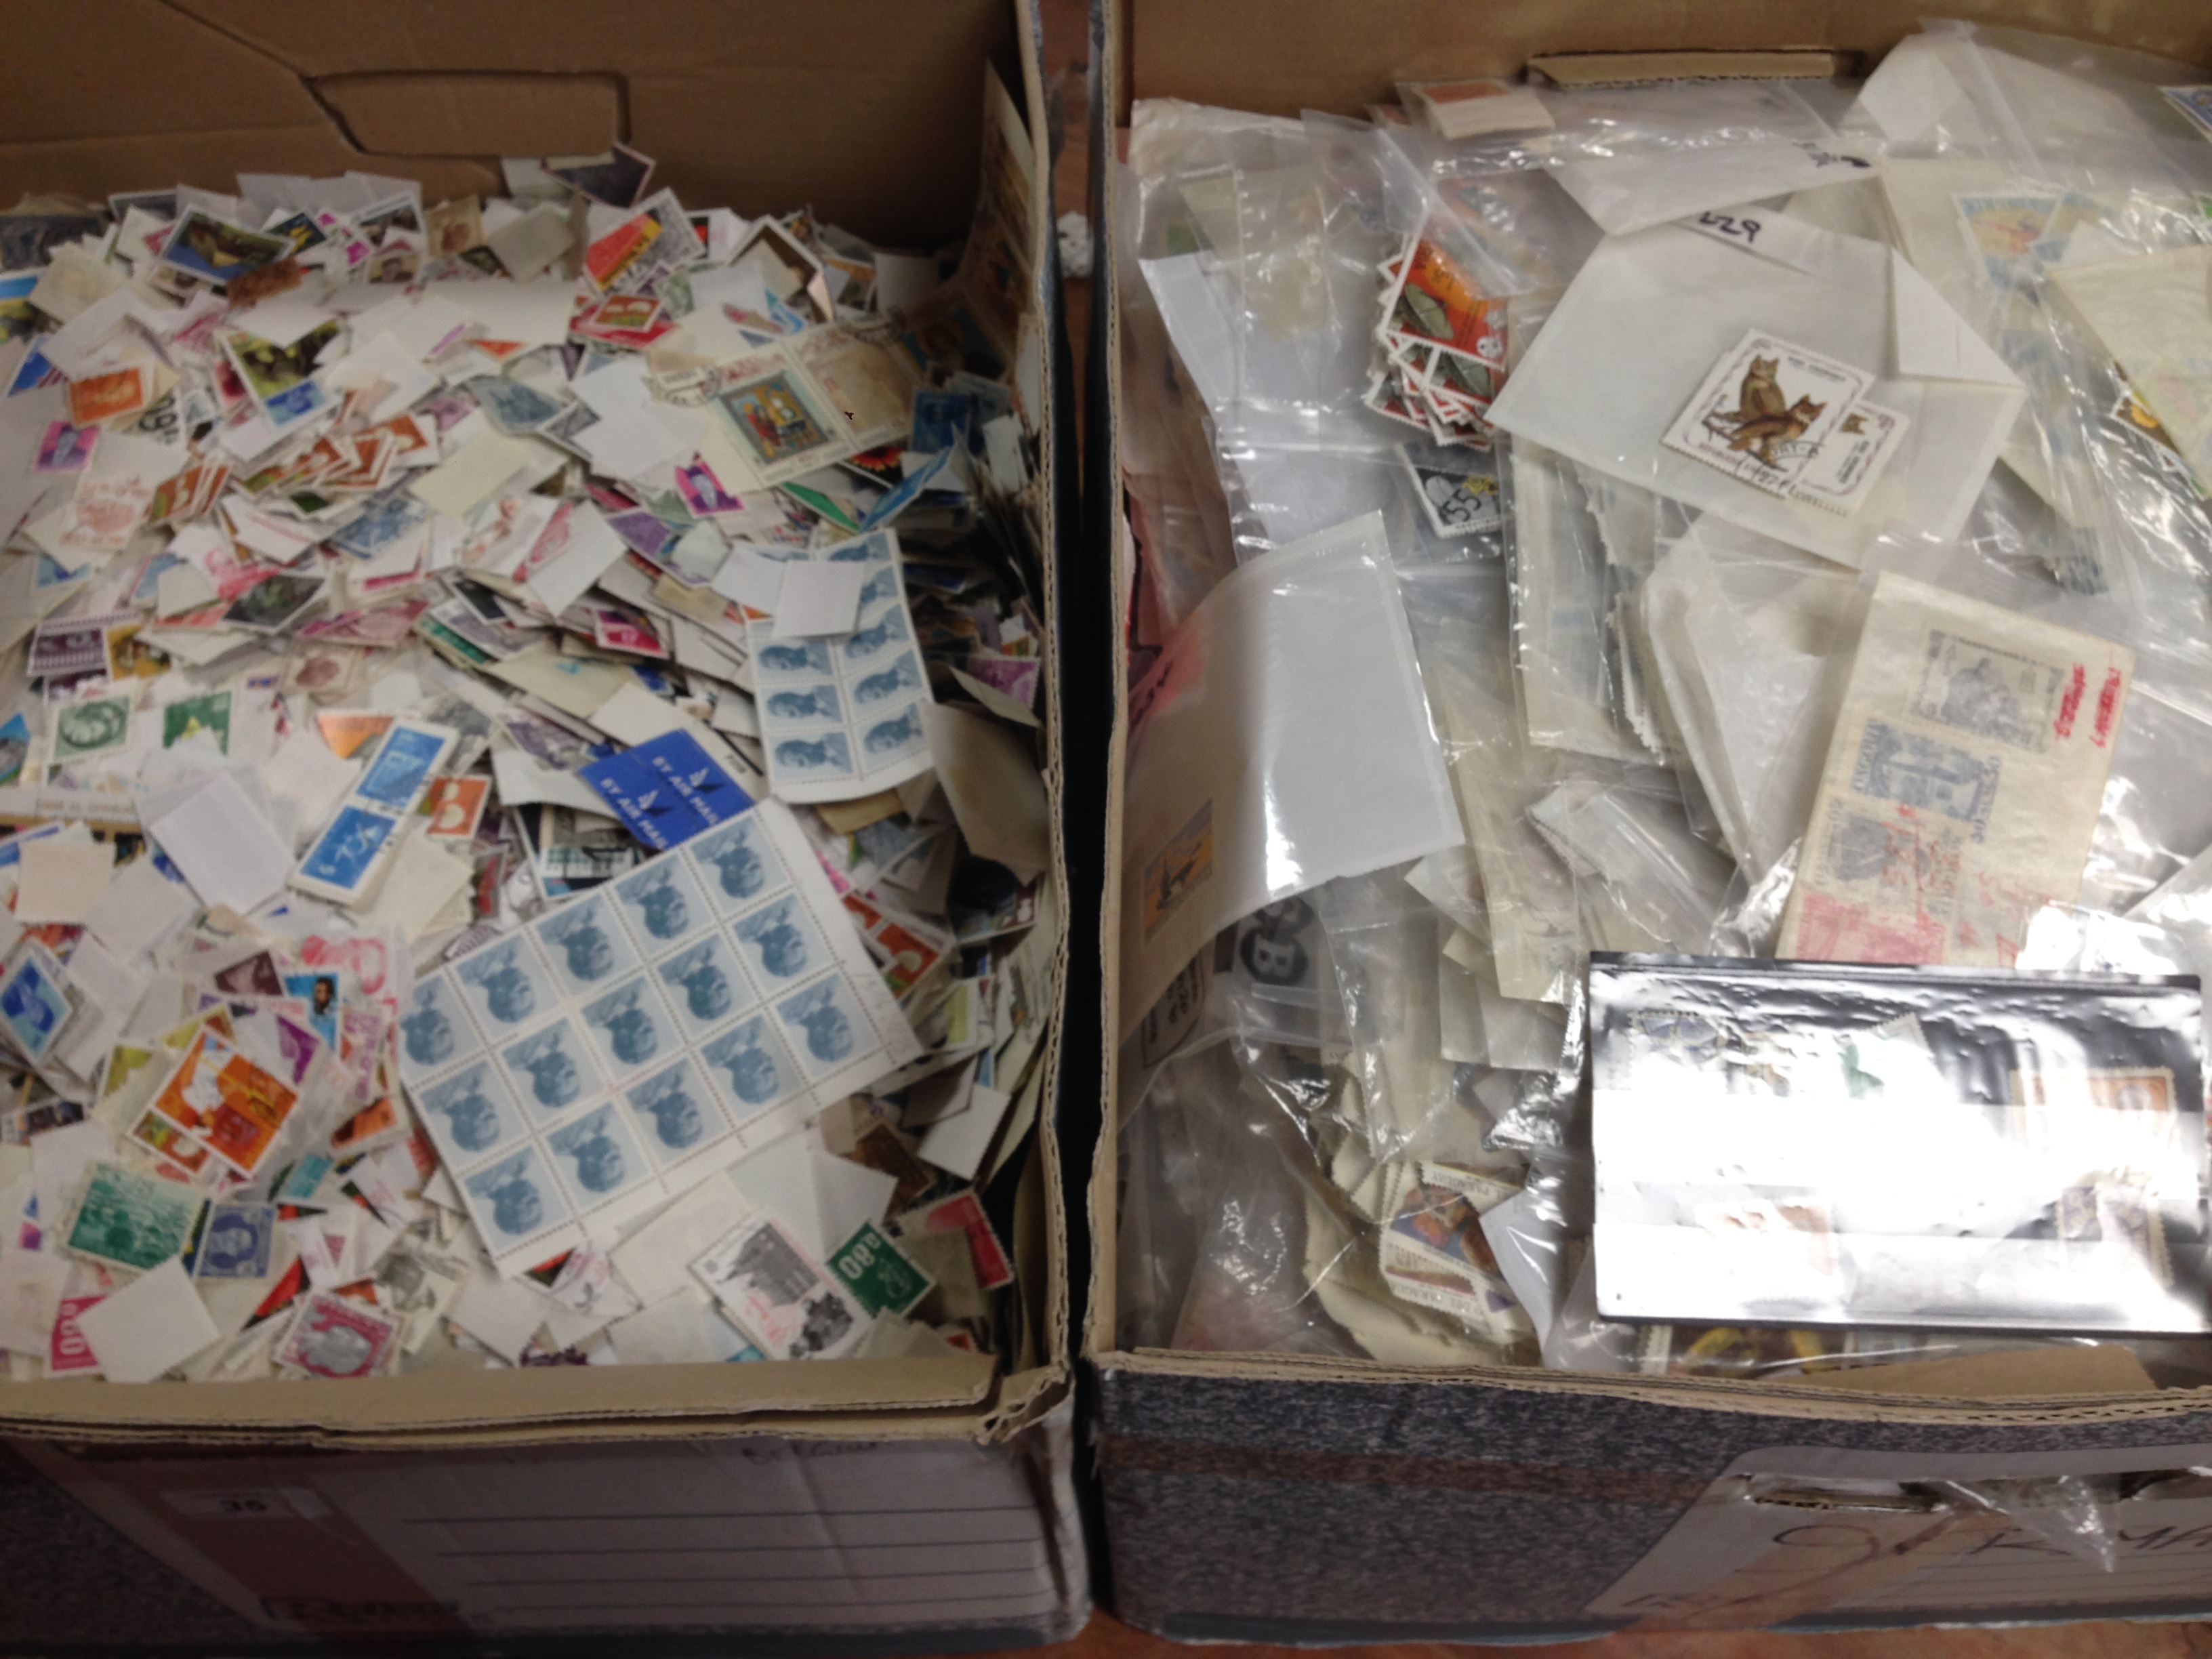 TWO LARGE BOXES WITH ALL WORLD LOOSE STAMPS,